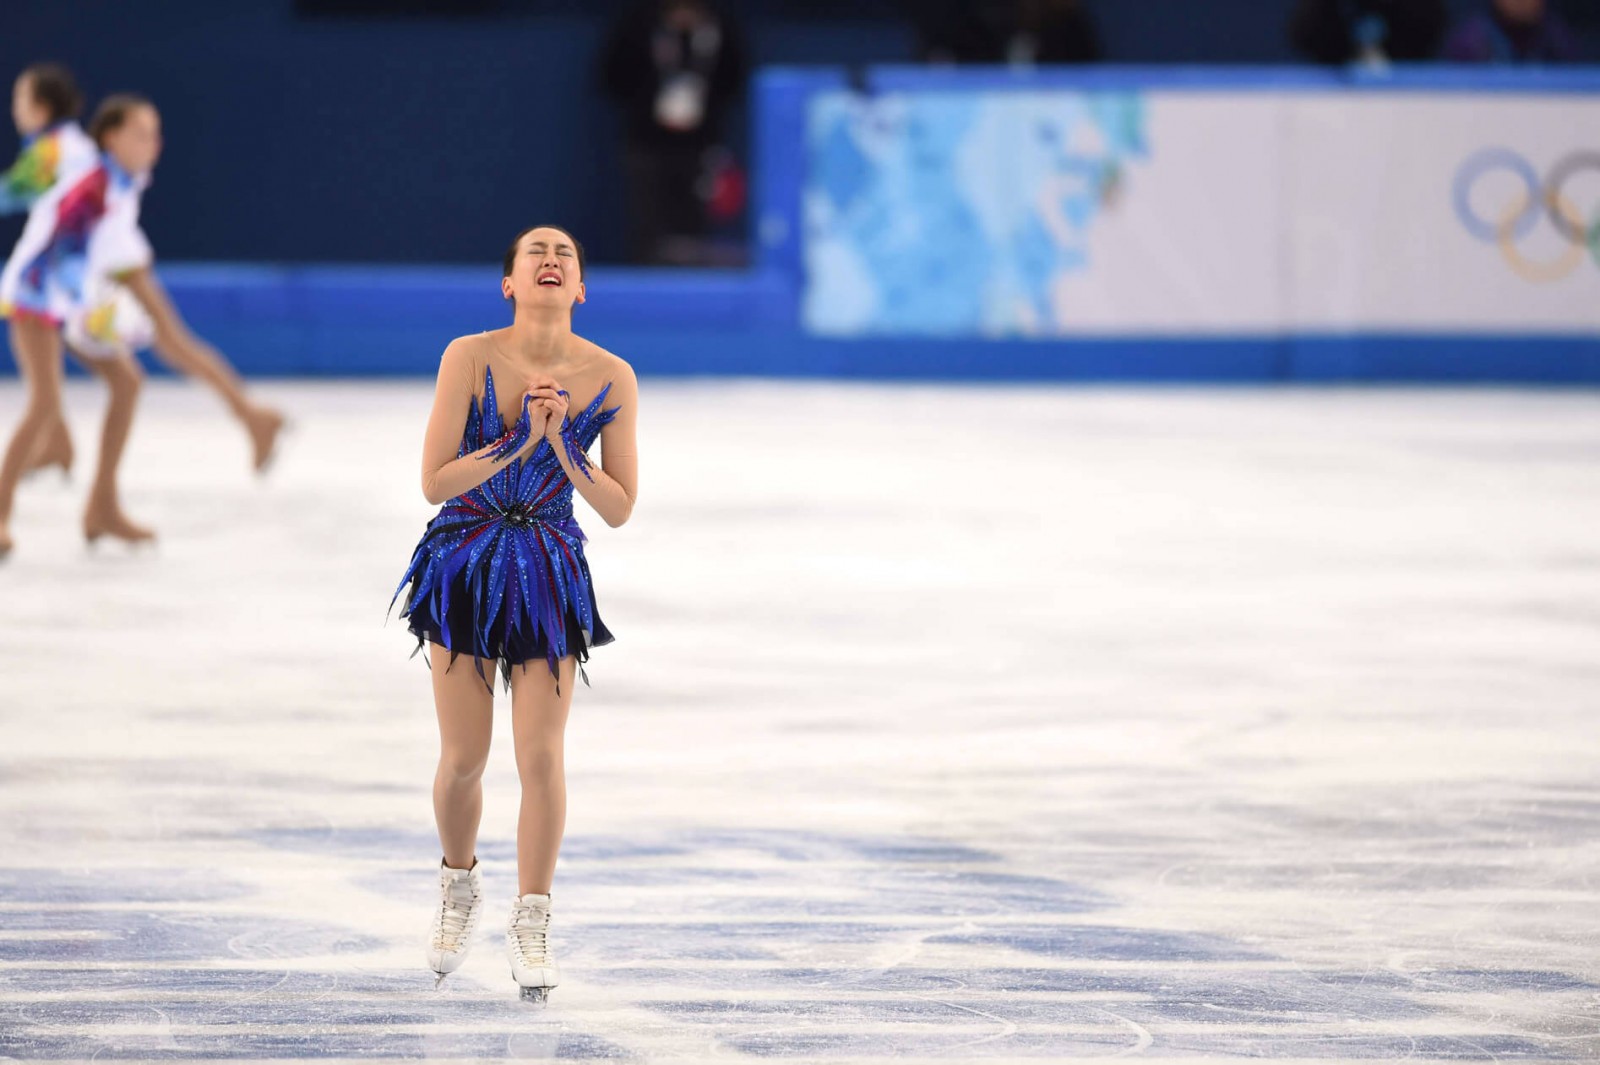 A welling up of emotion brings tears to Asada’s eyes after her free skate at Sochi 2014. 